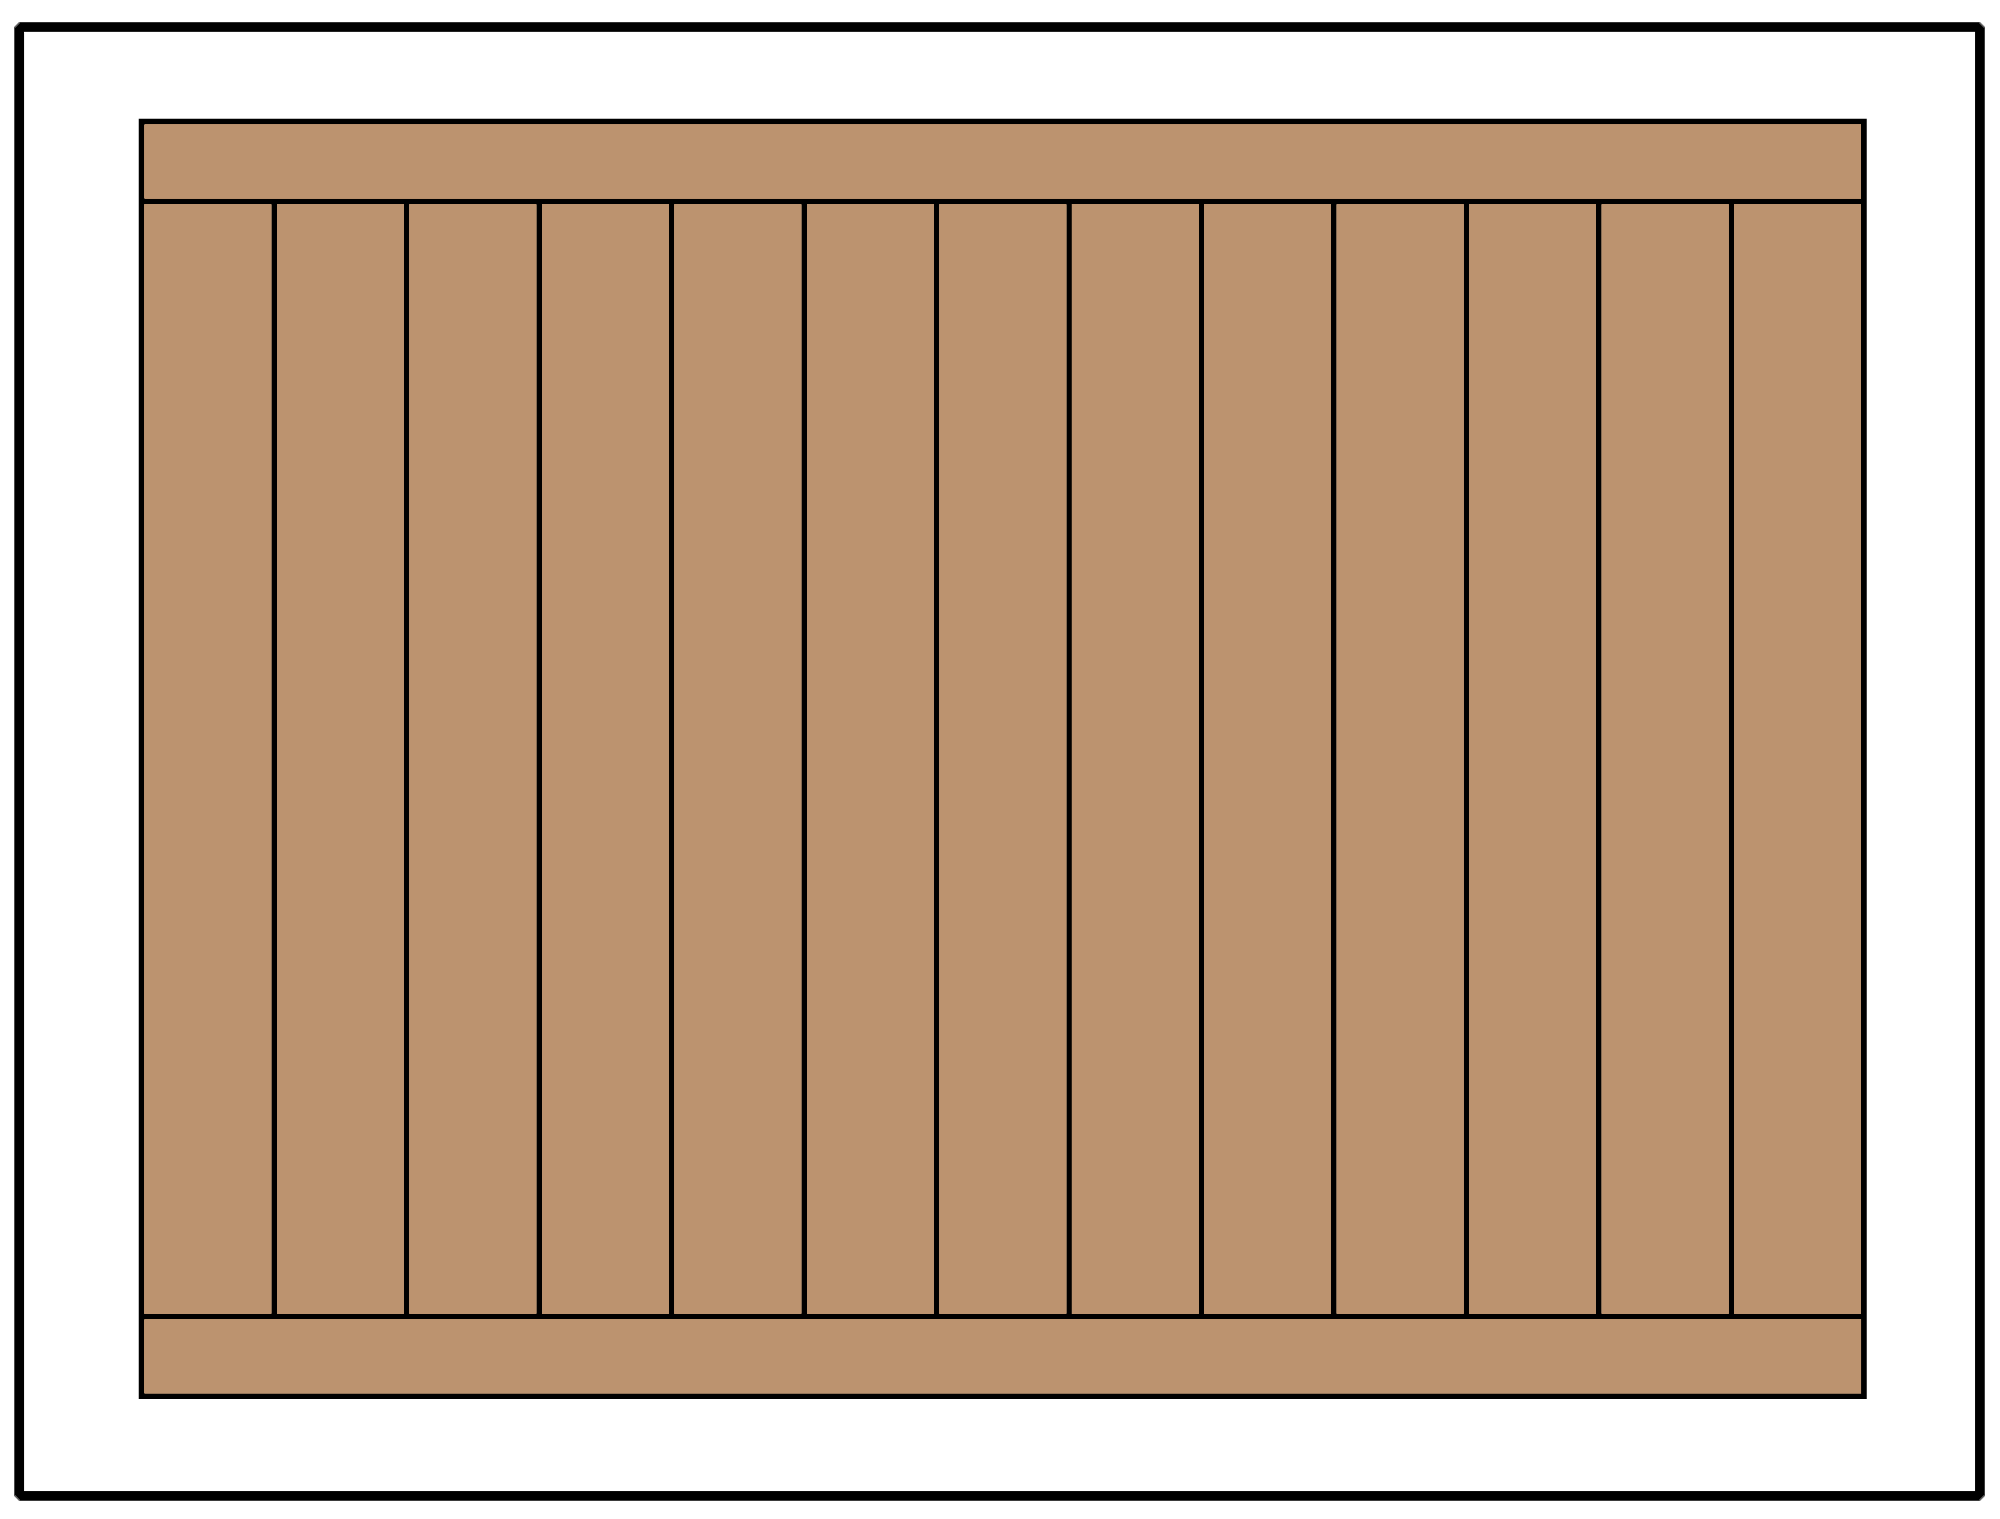 Illustration of a framed style privacy fence